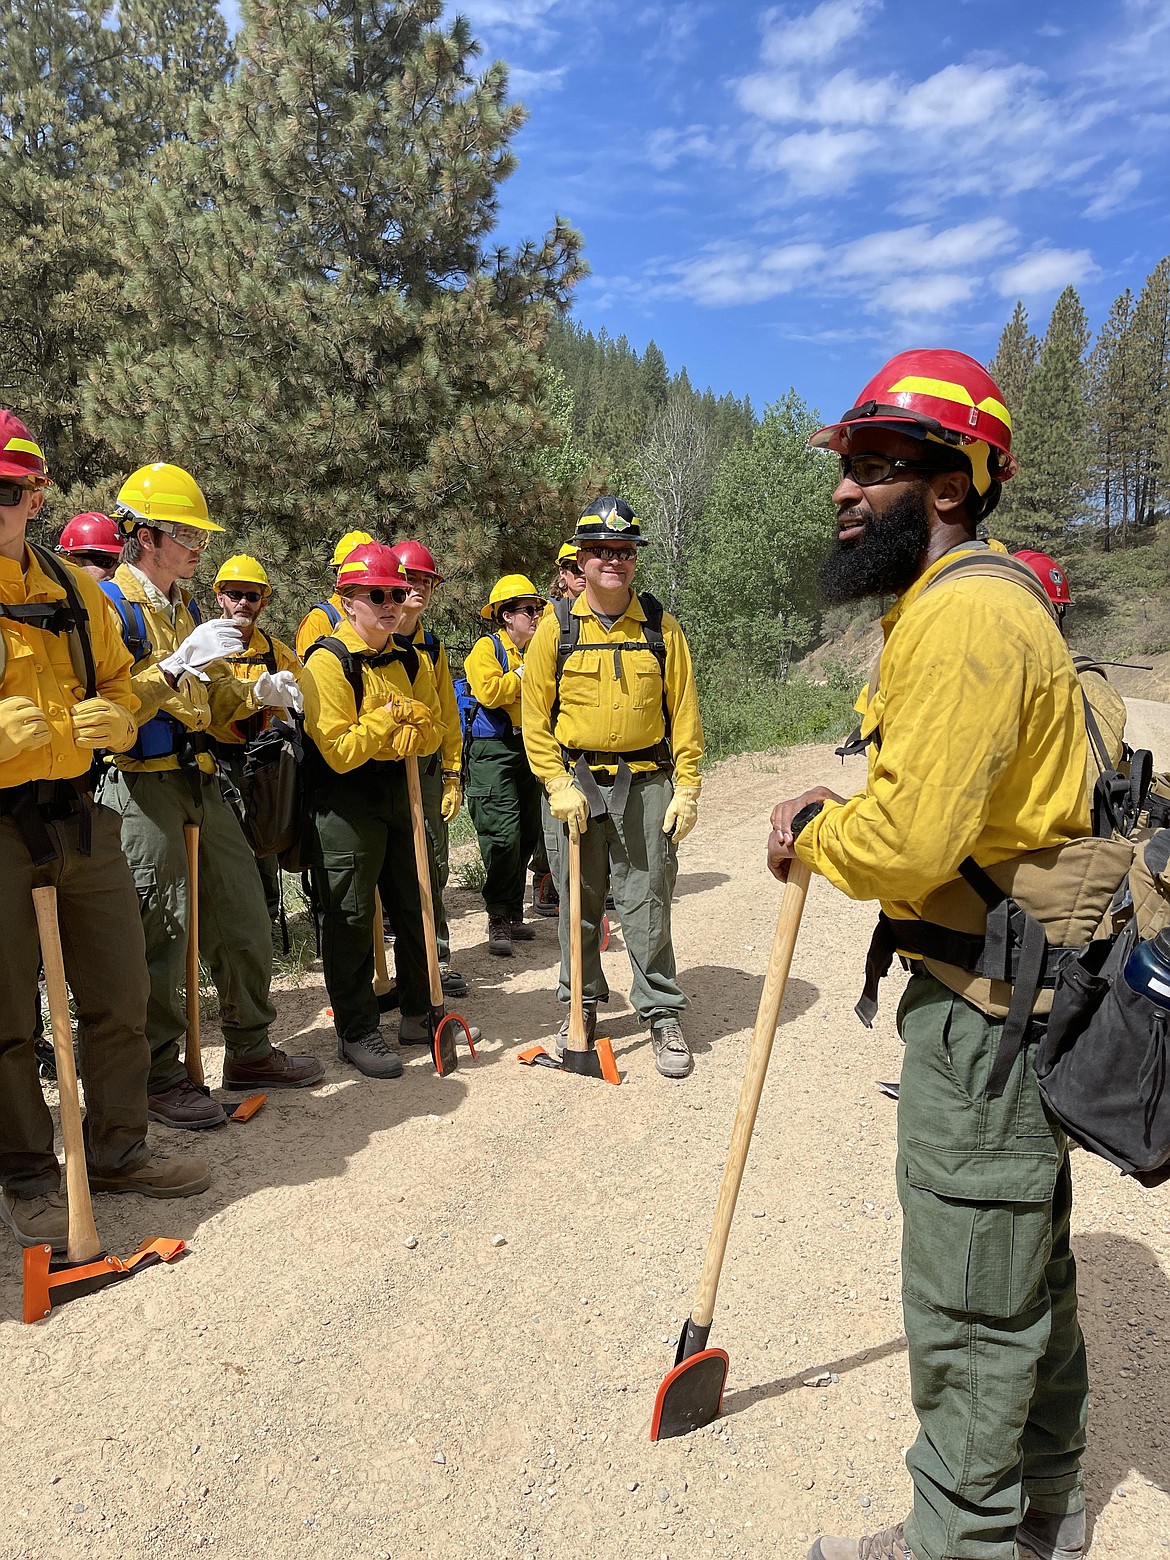 Wildland firefighter recruits practice techniques as part of Southwest Idaho Interagency Fire Training near Idaho City in May. This annual training exercise is the first time these recruits put into practice what they learned throughout a week of wildland firefighter training.